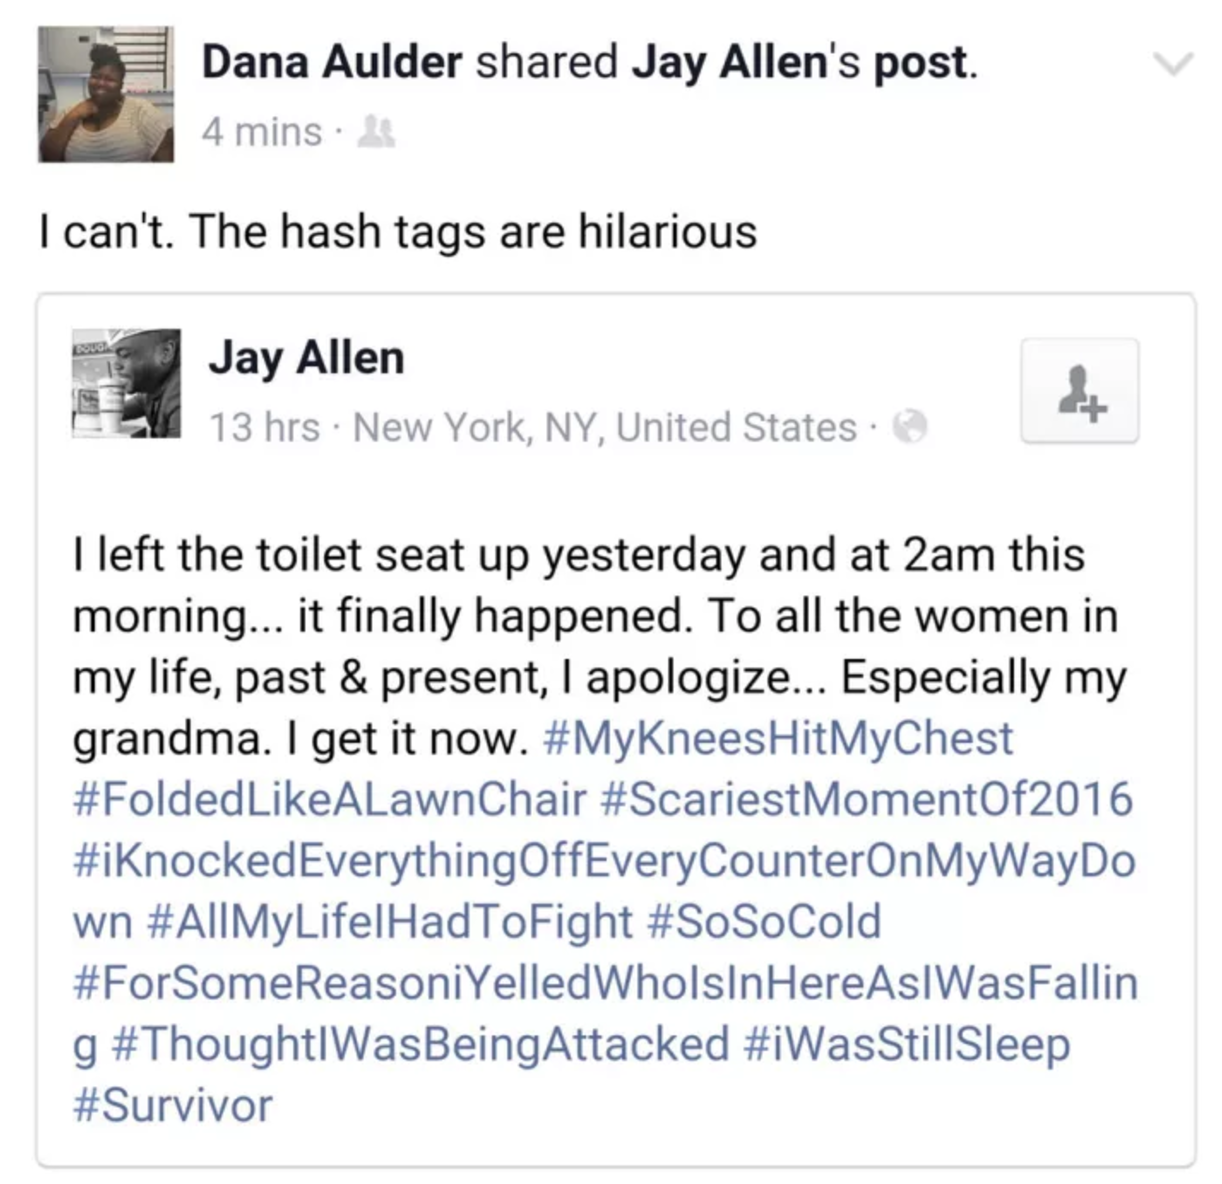 someone using funny hashtags to describe themselves falliing iin a toilet